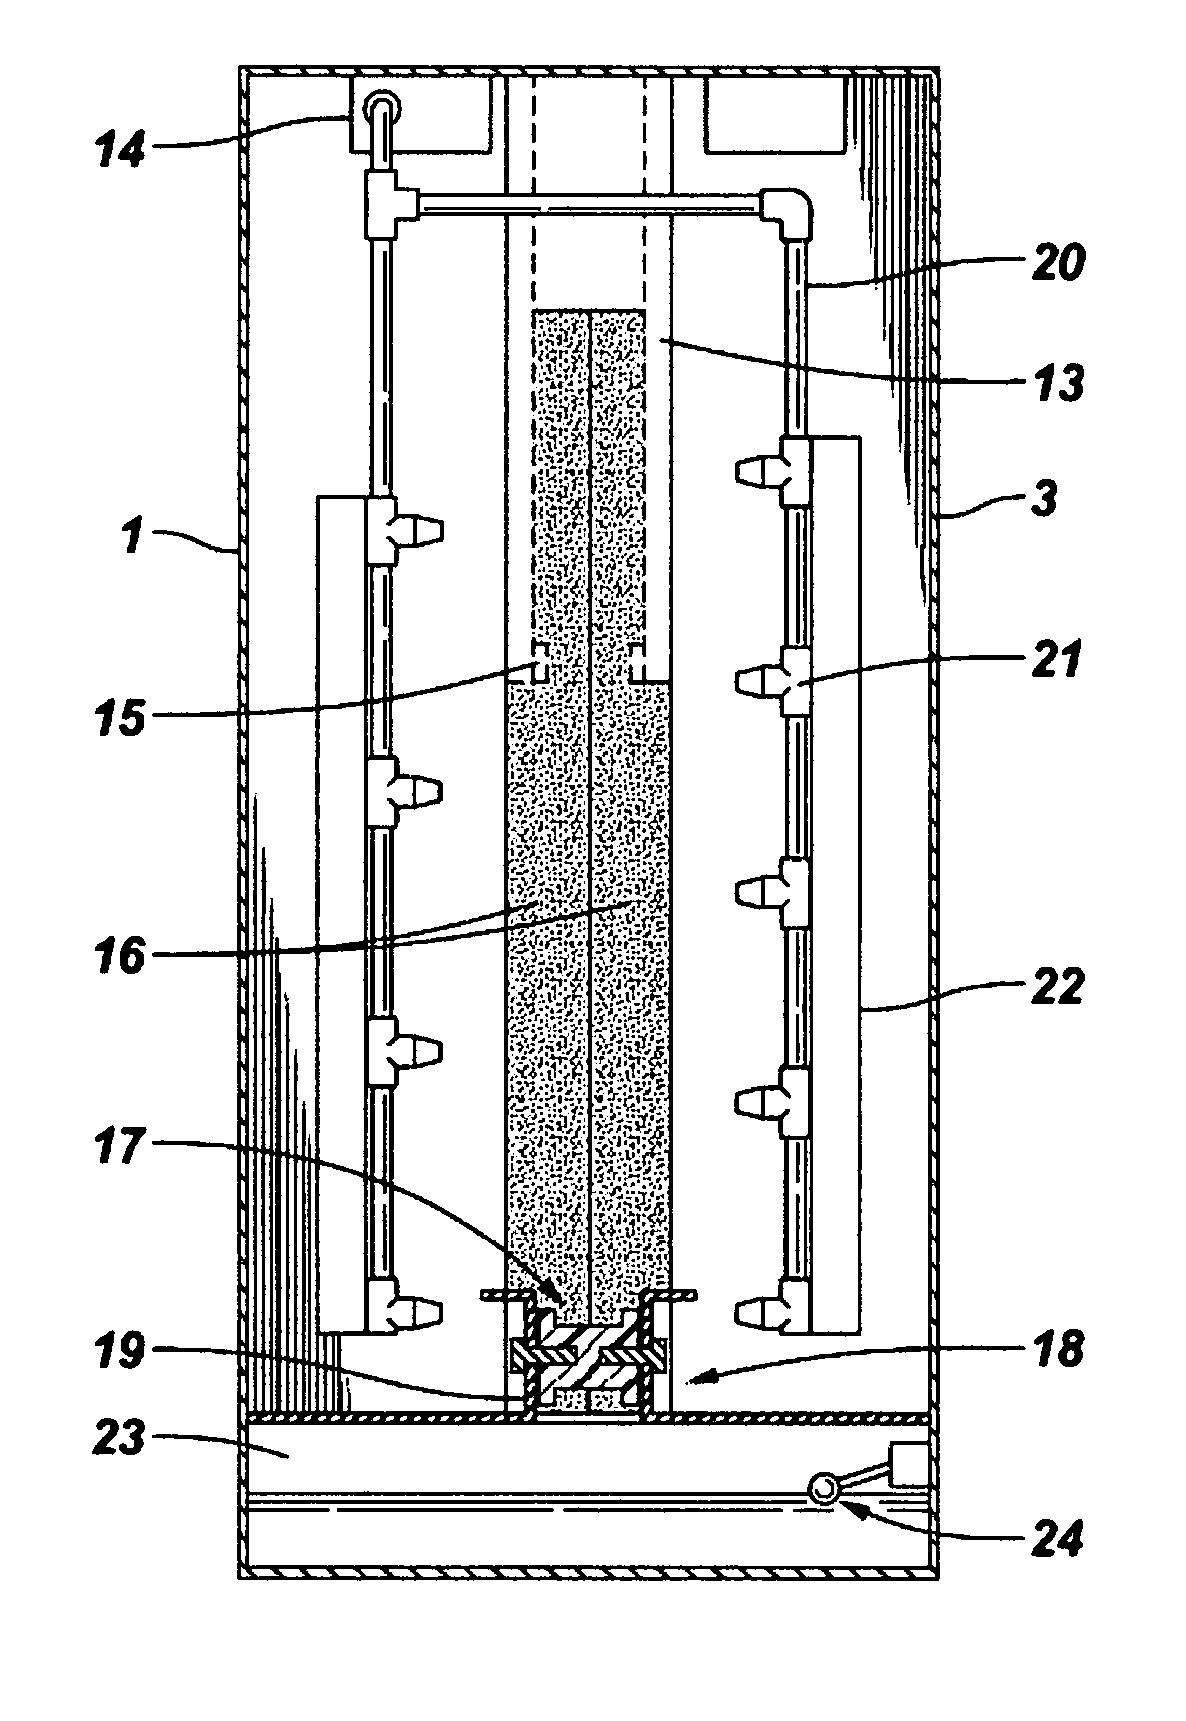 Methods and Apparatus for Cleaning Screens Used in Solid/Liquid Separations in Oilfield Operations